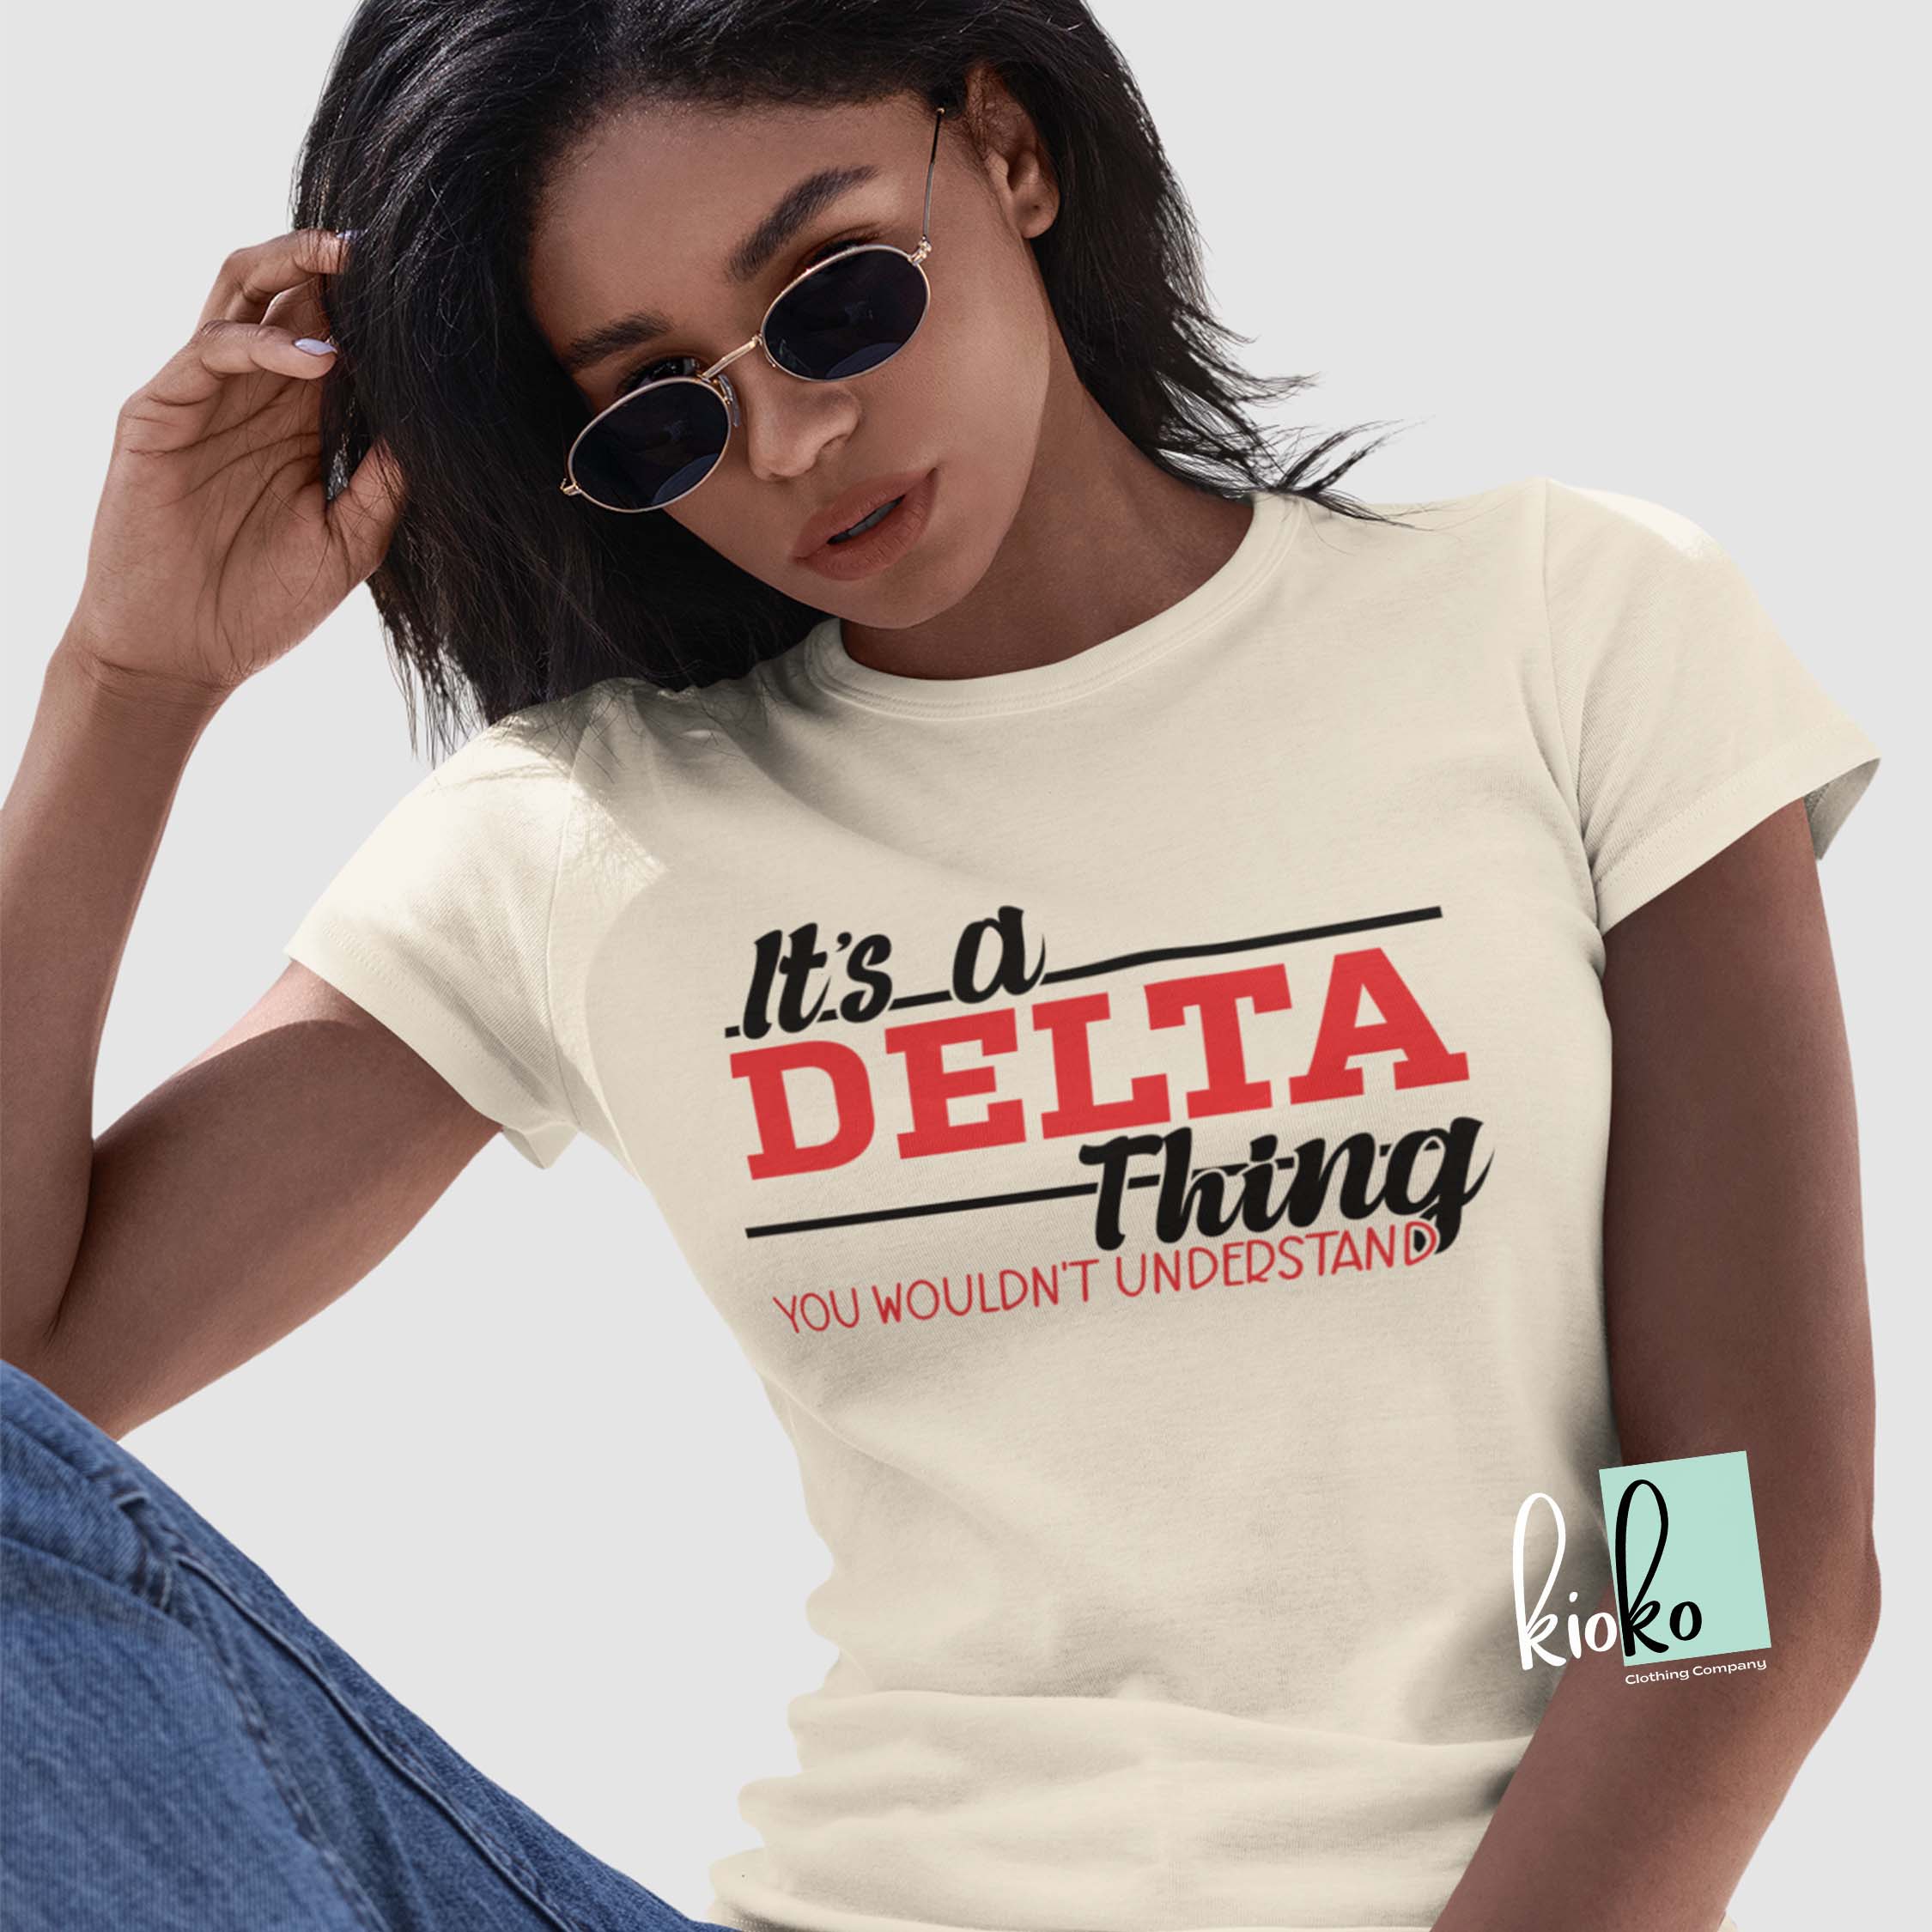 Going for intricate designs - Delta Sportswear Philippines